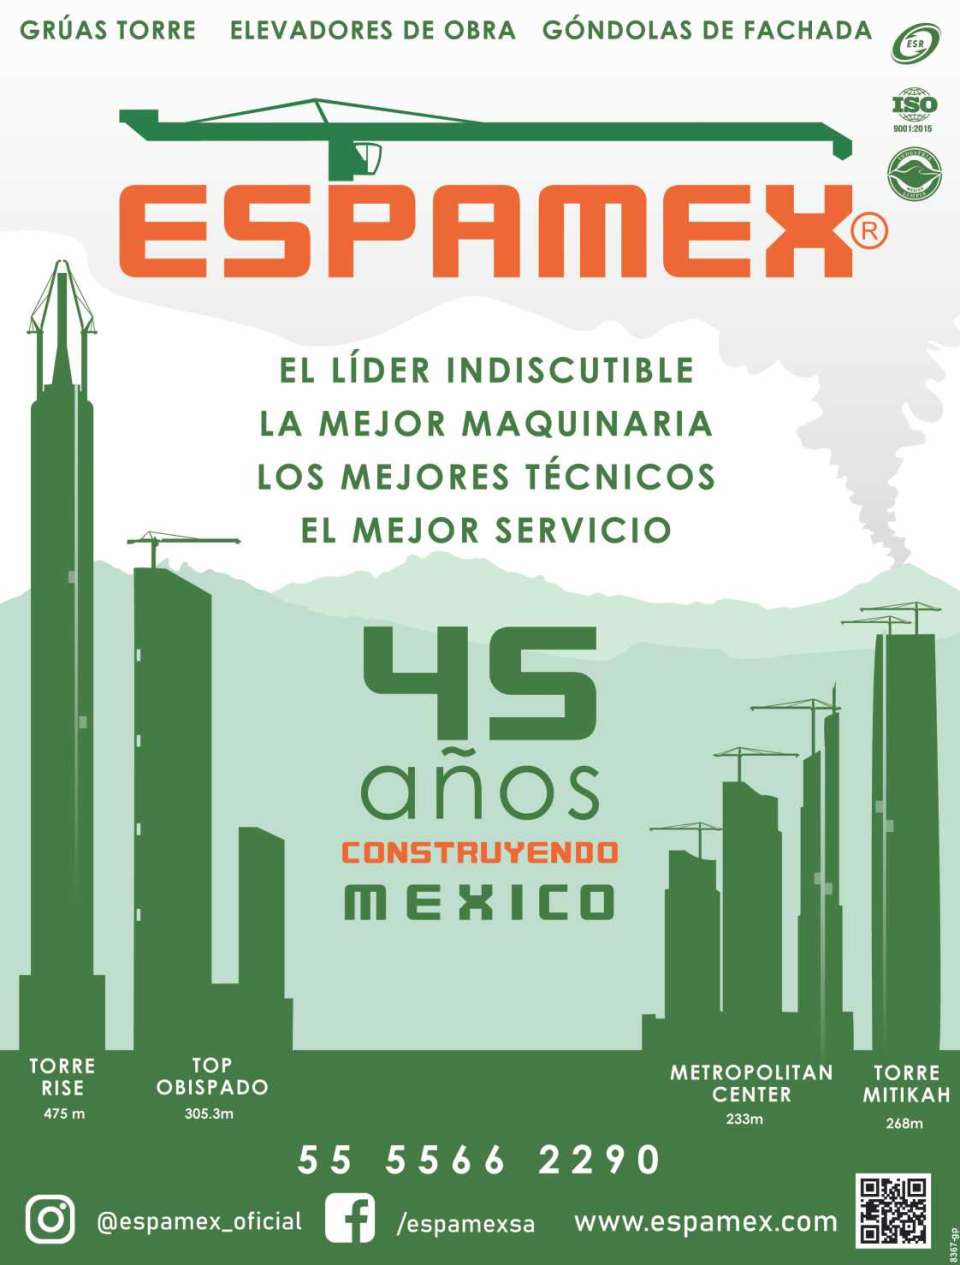 Tower Cranes, Construction Elevators, Facade Gondolas. Thanks to your Trust, 80% of the tallest Towers in Mexico have been built with Espamex Equipment. 45 Years Building Mexico.